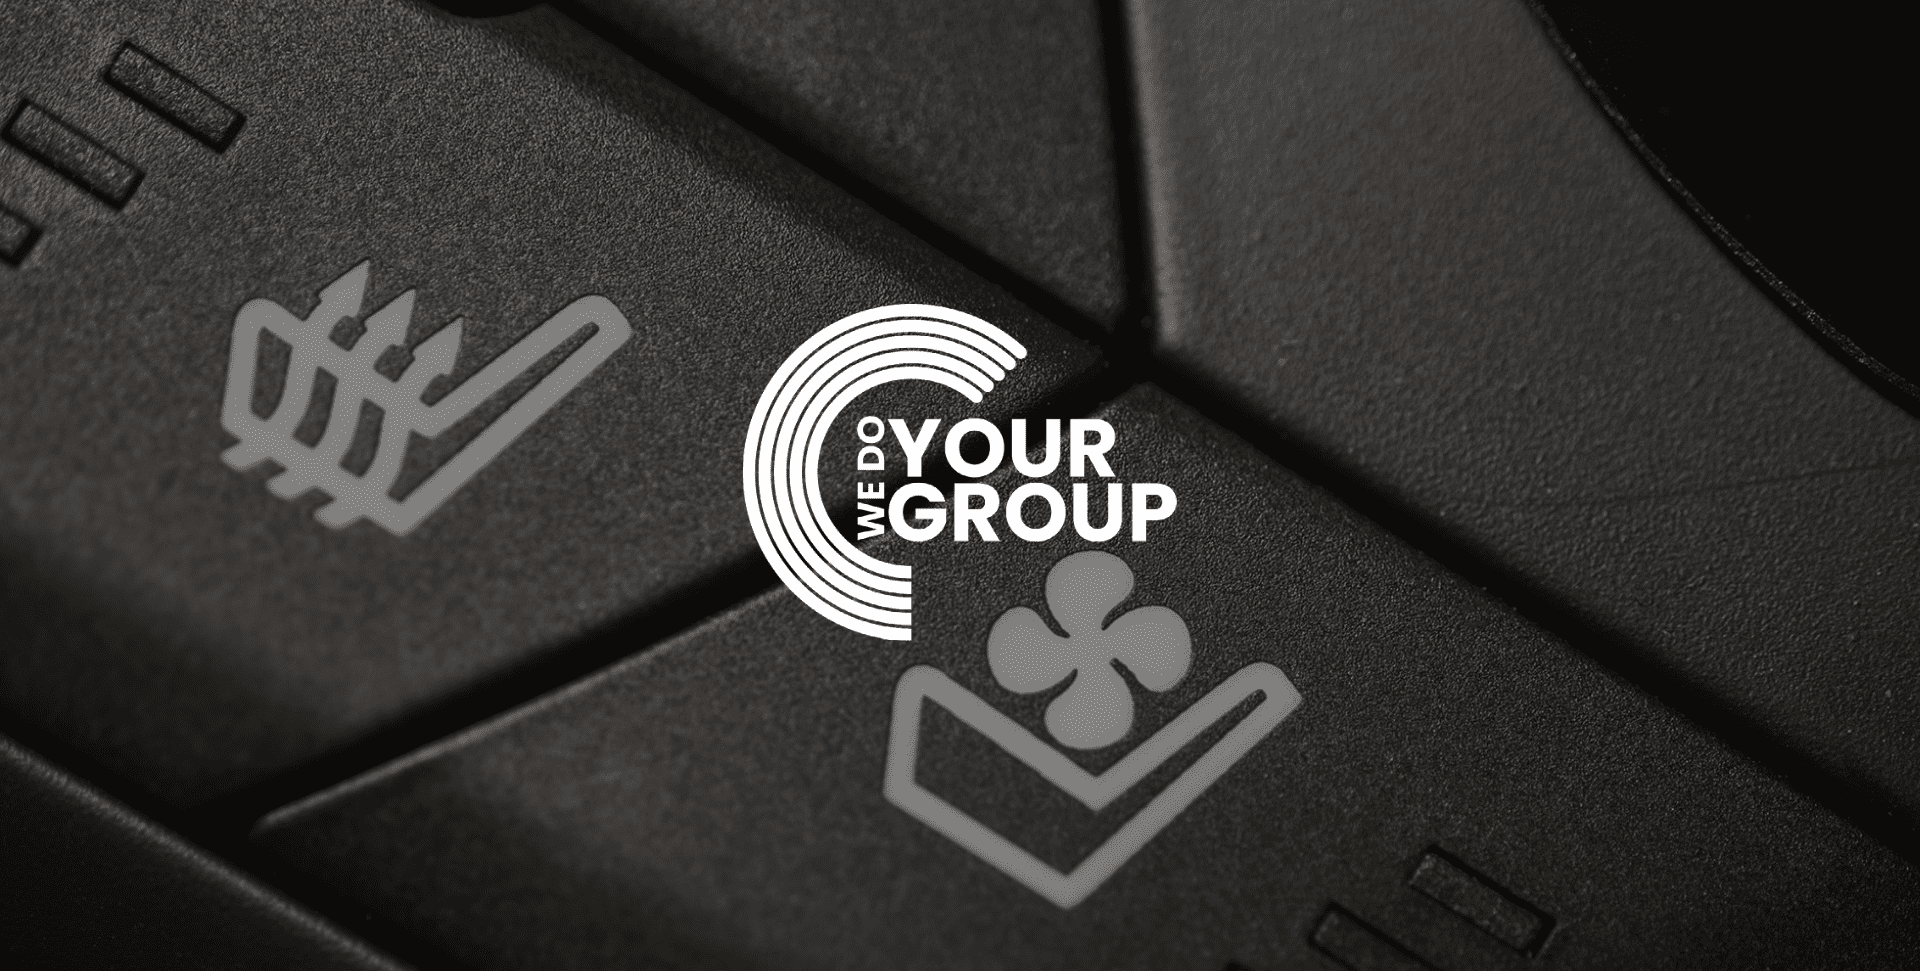 WeDoYourGroup white logo on background of heated seat buttons in car